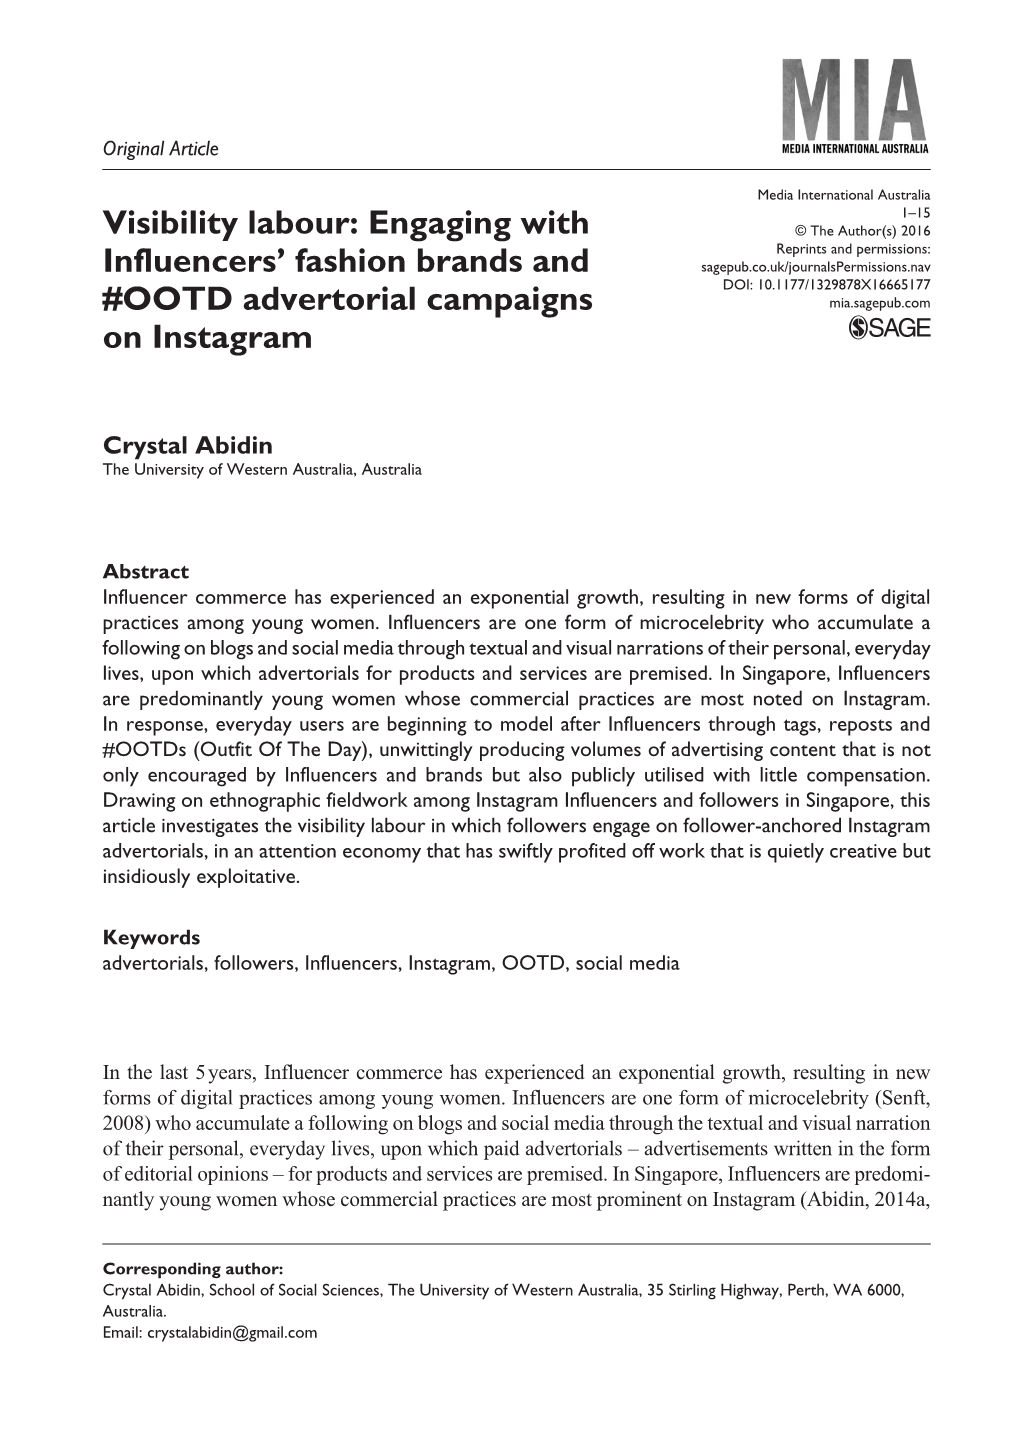 Visibility Labour: Engaging with Influencers' Fashion Brands and #OOTD Advertorial Campaigns on Instagram